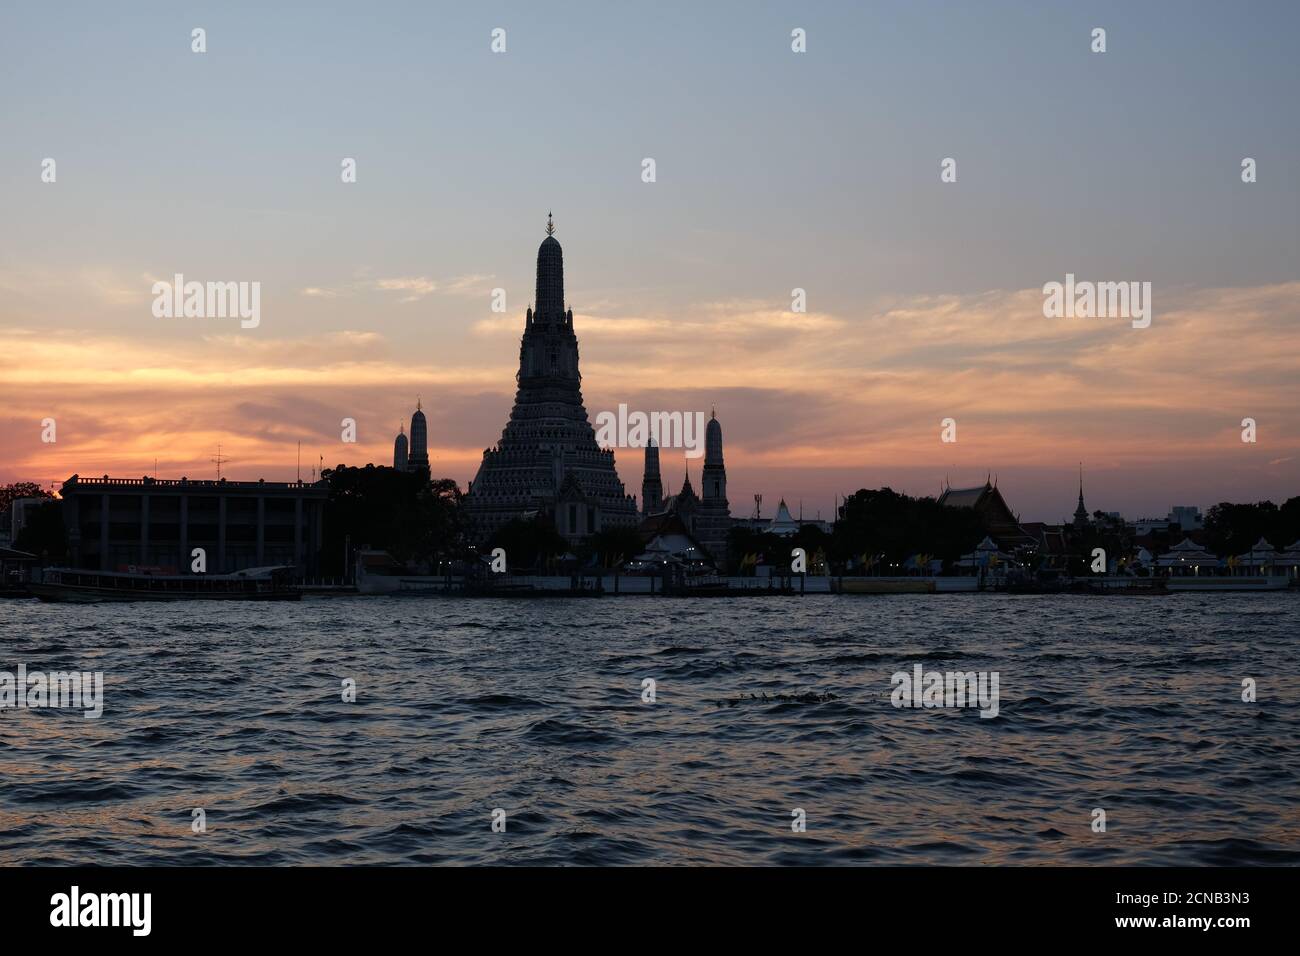 Bangkok, Thailand, December 25, 2018. Wat Arun Temple stands on the banks of the Chao Phraya River at dusk. Stock Photo